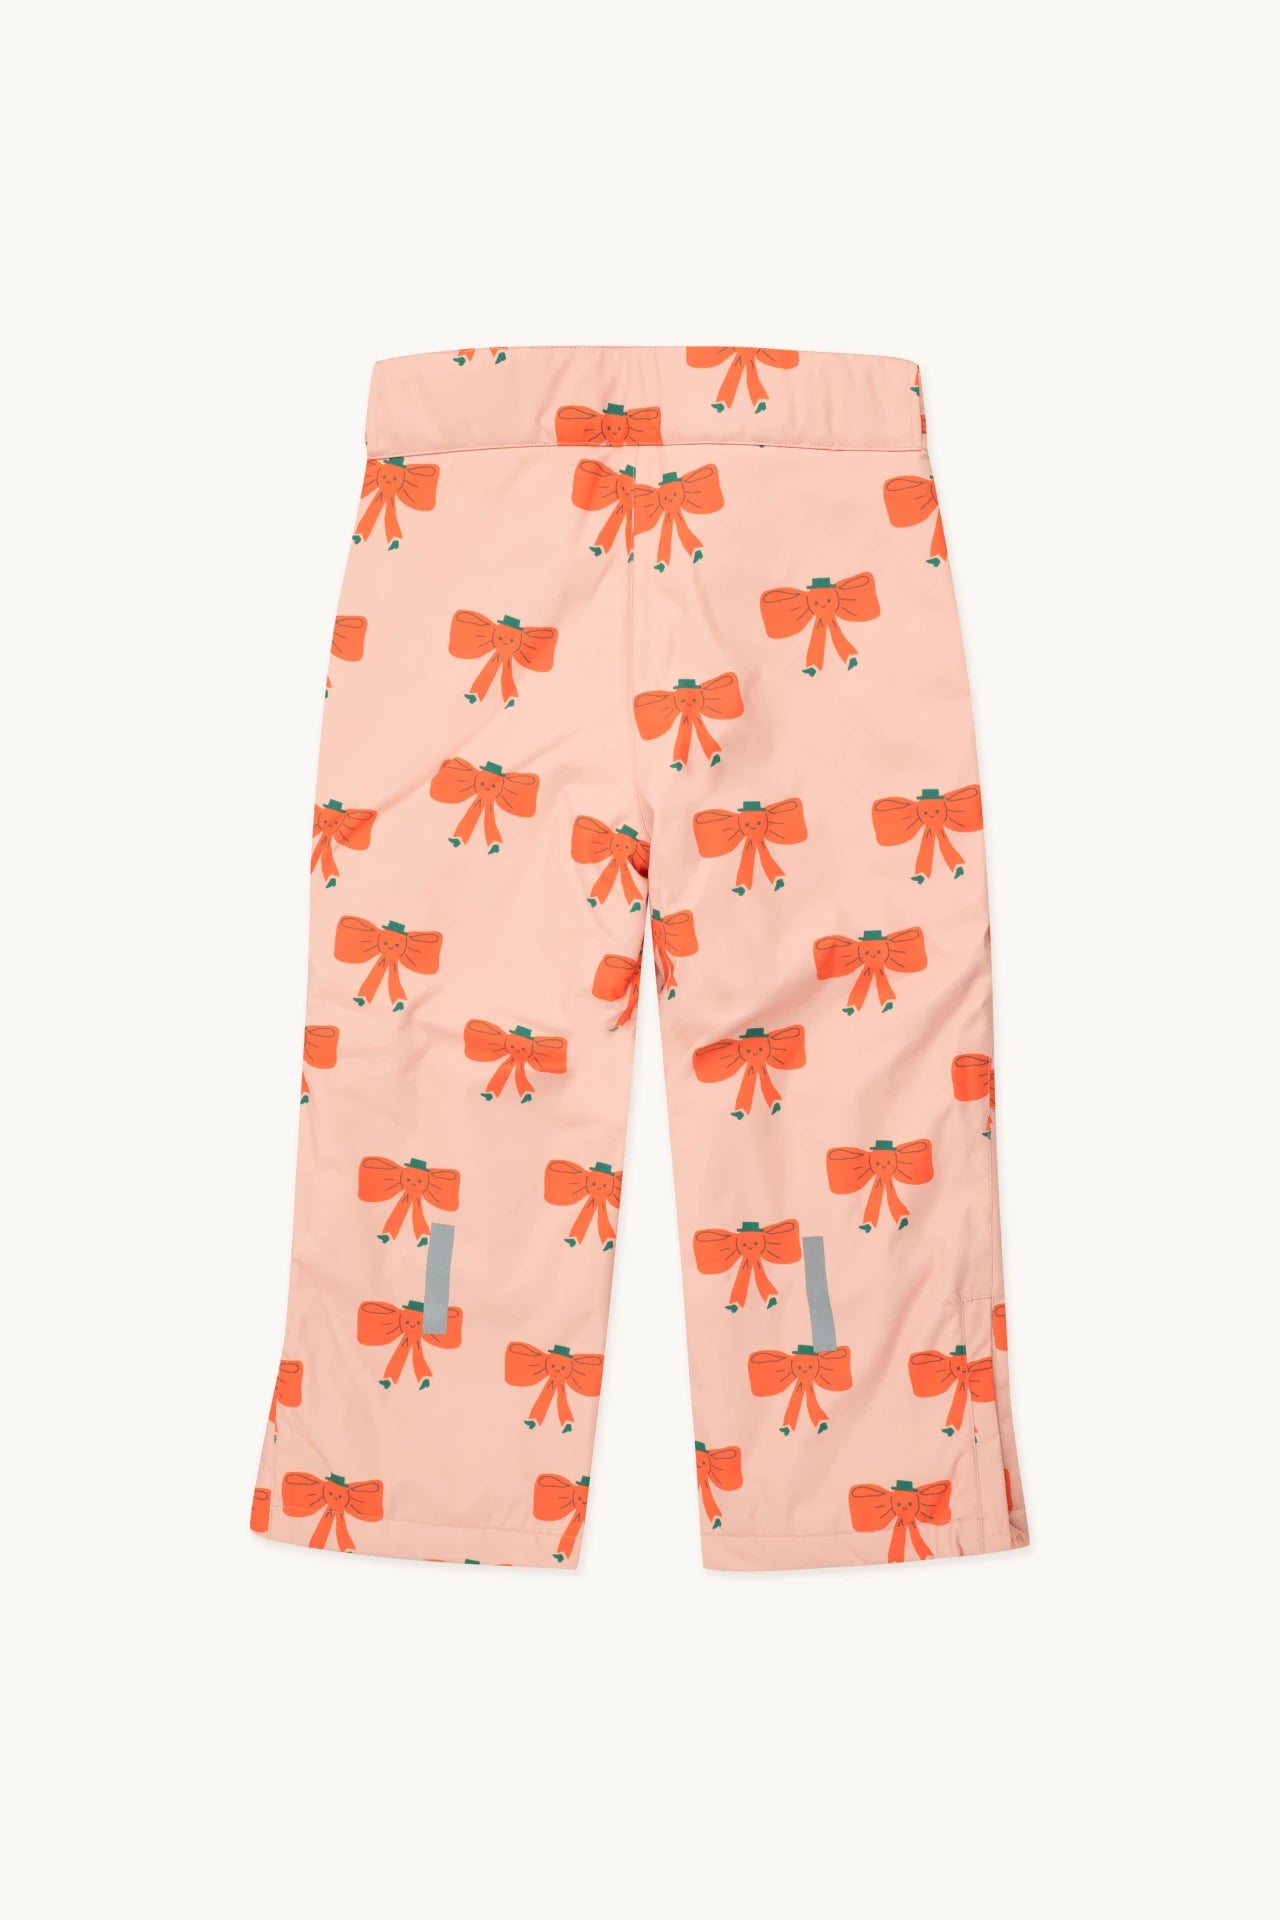 Tiny Cottons Tiny Bow Snow Trousers - peach